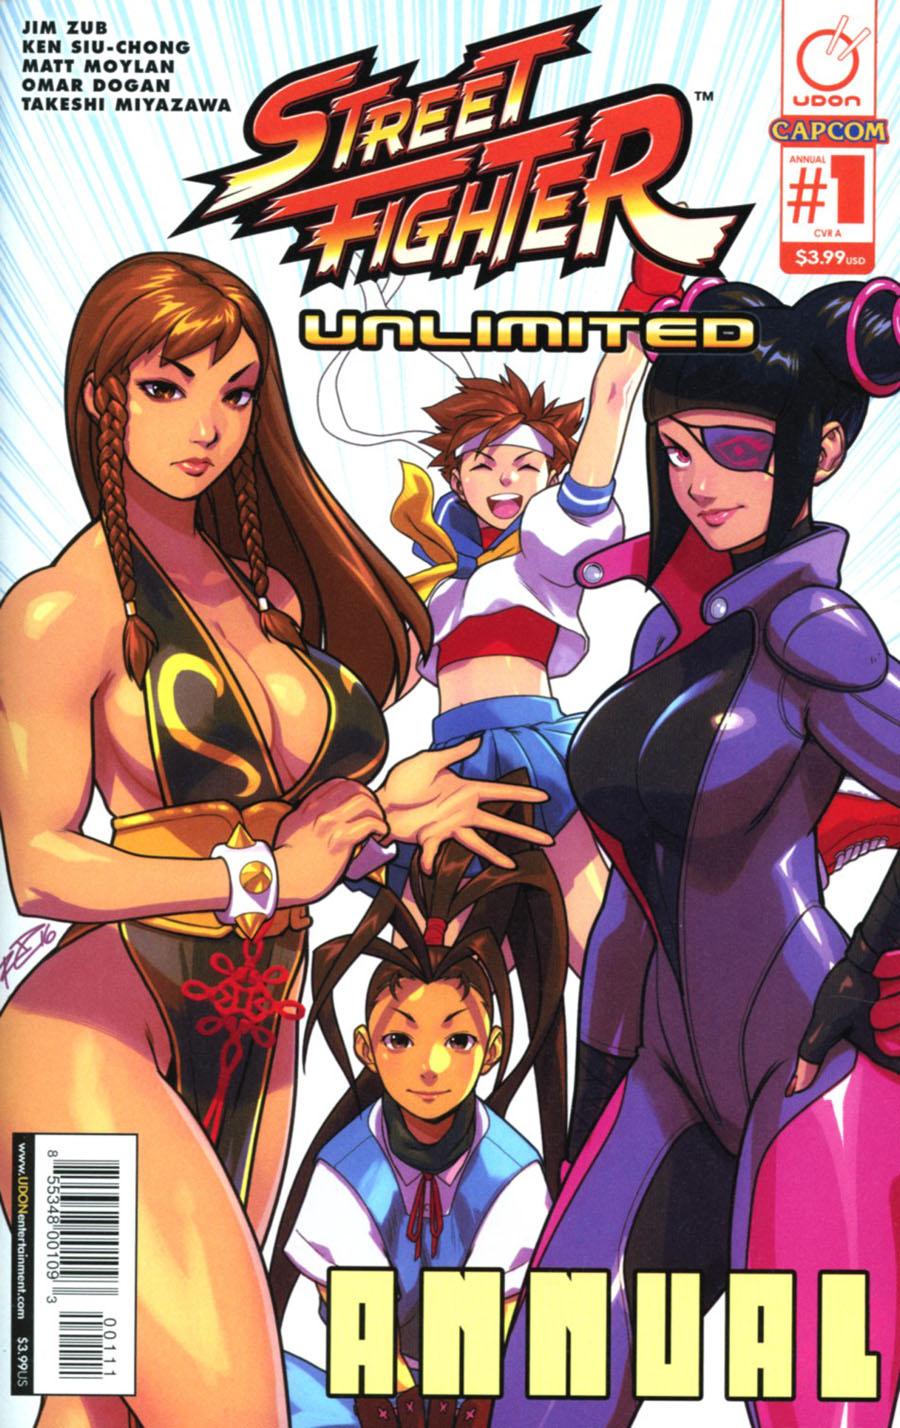 Street Fighter Unlimited Vol. 1 #1